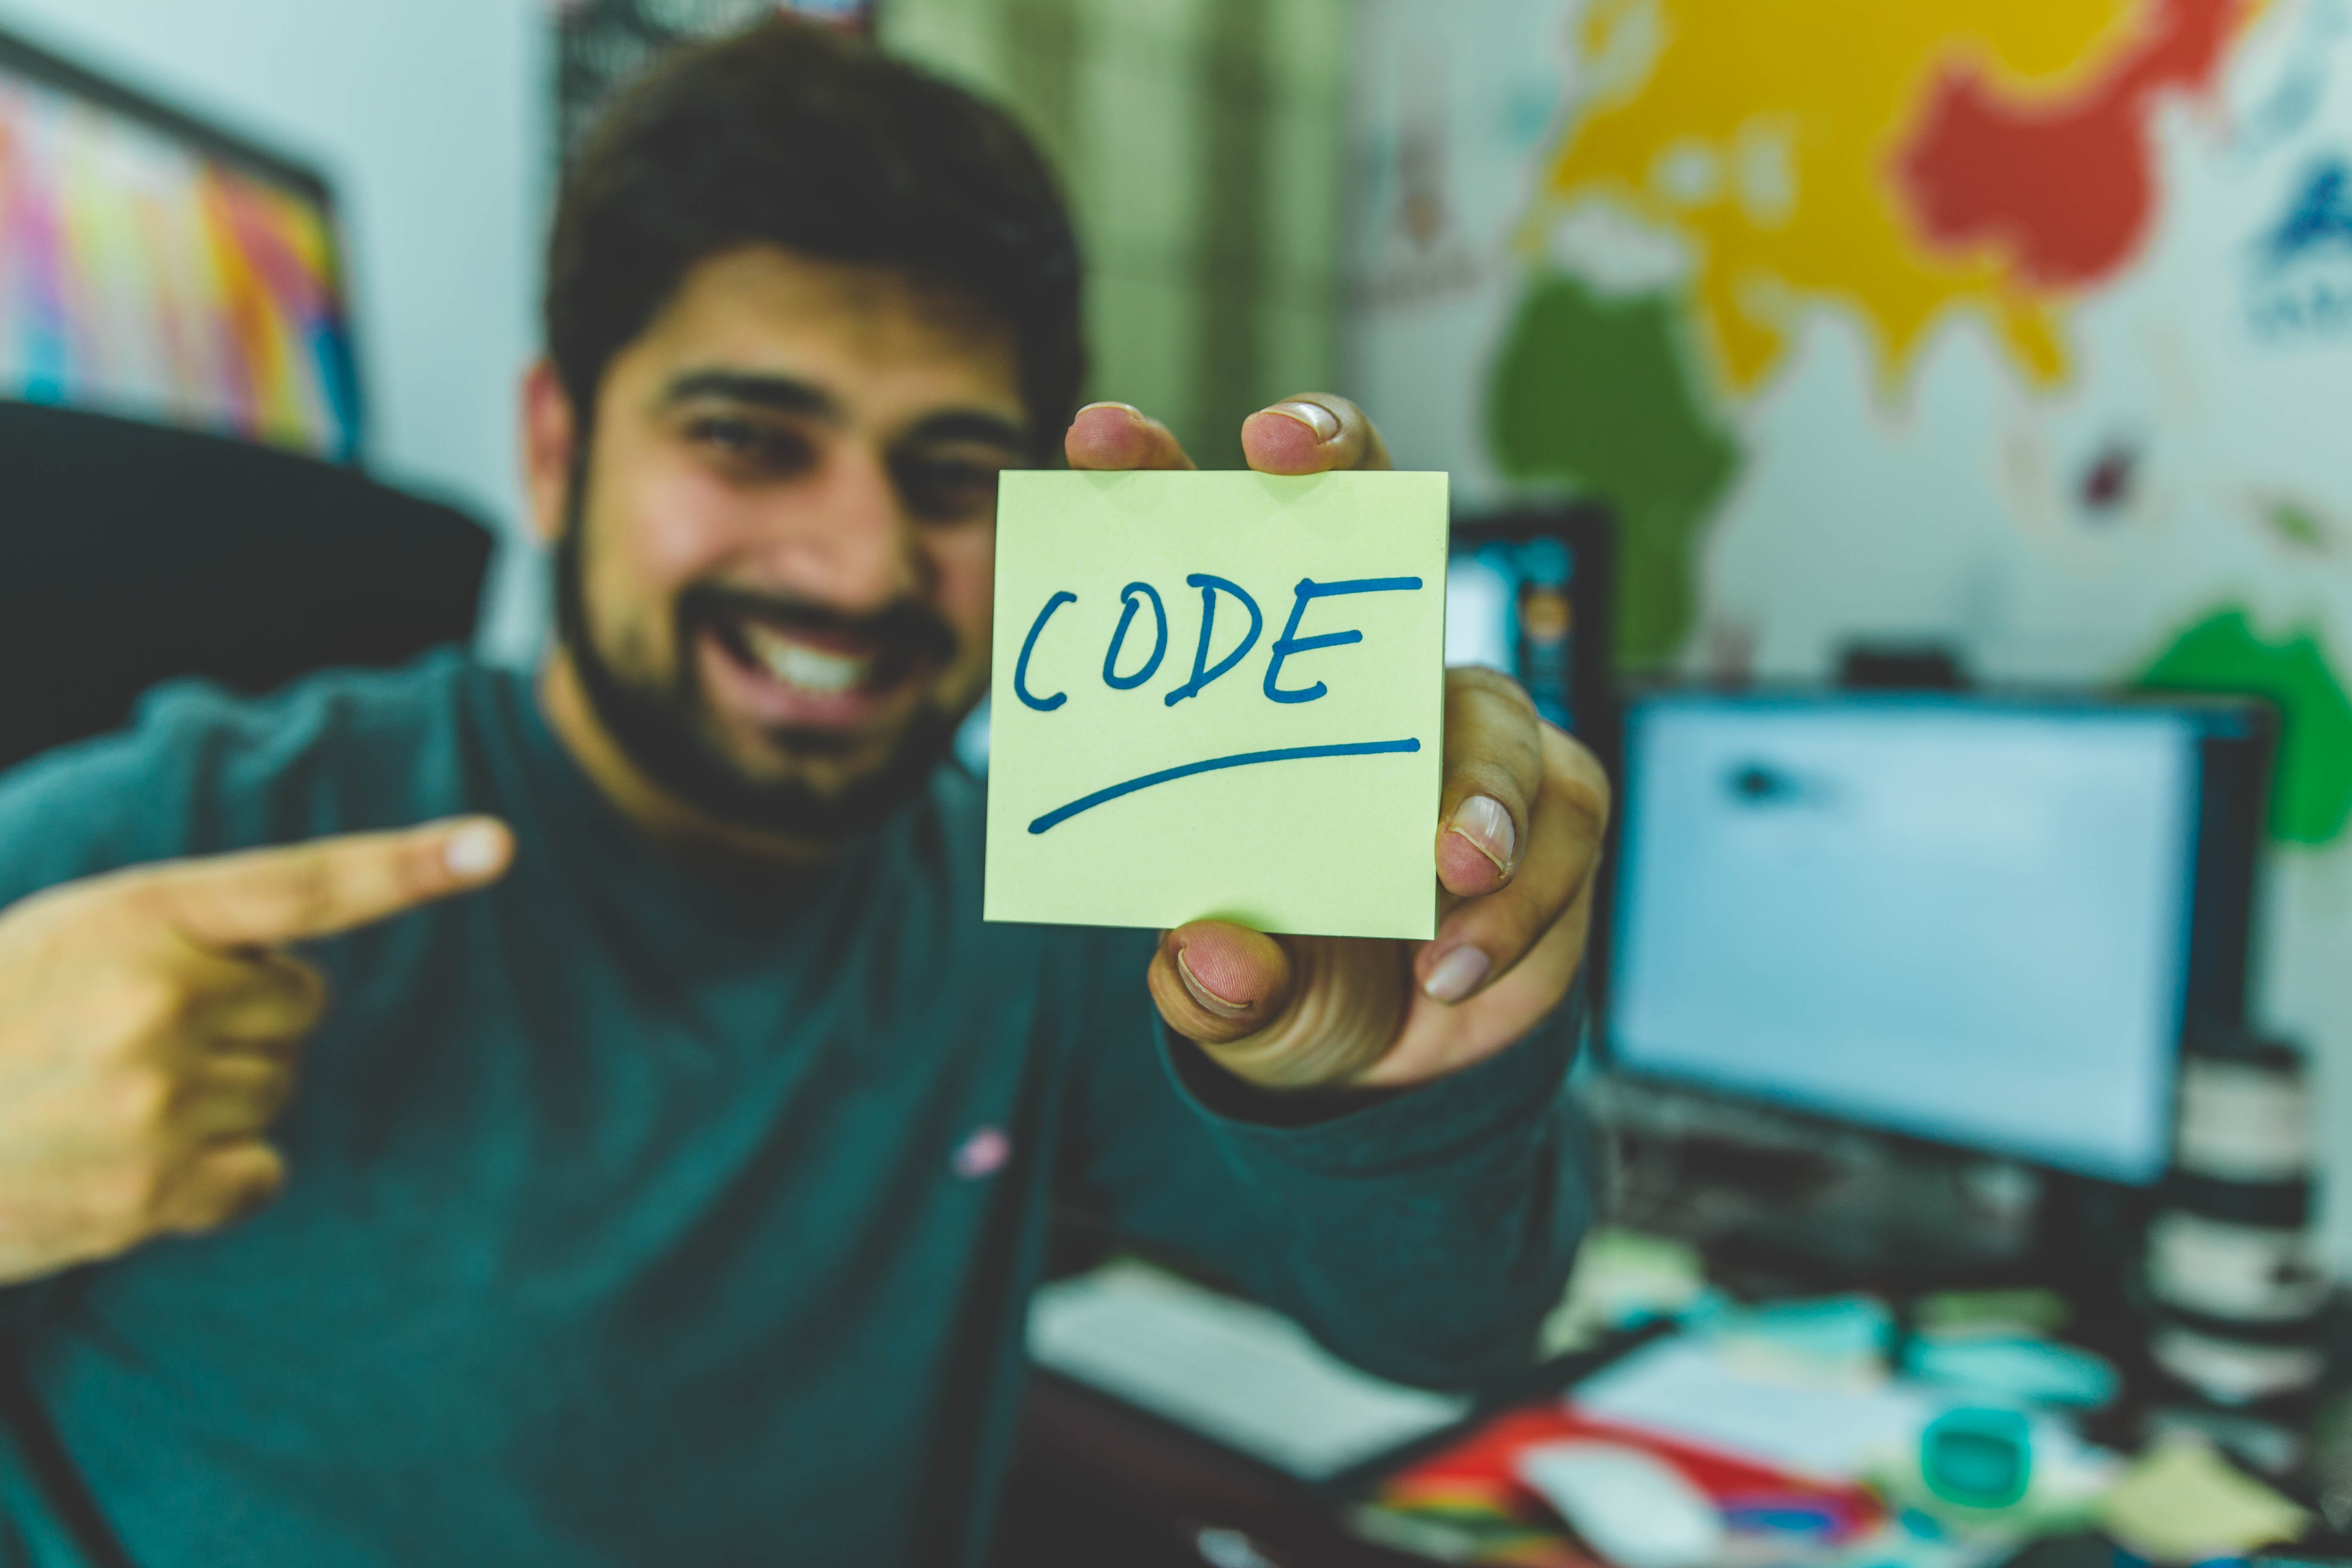 illustration image showing a blurred boy having a yellow sticker with code written in it